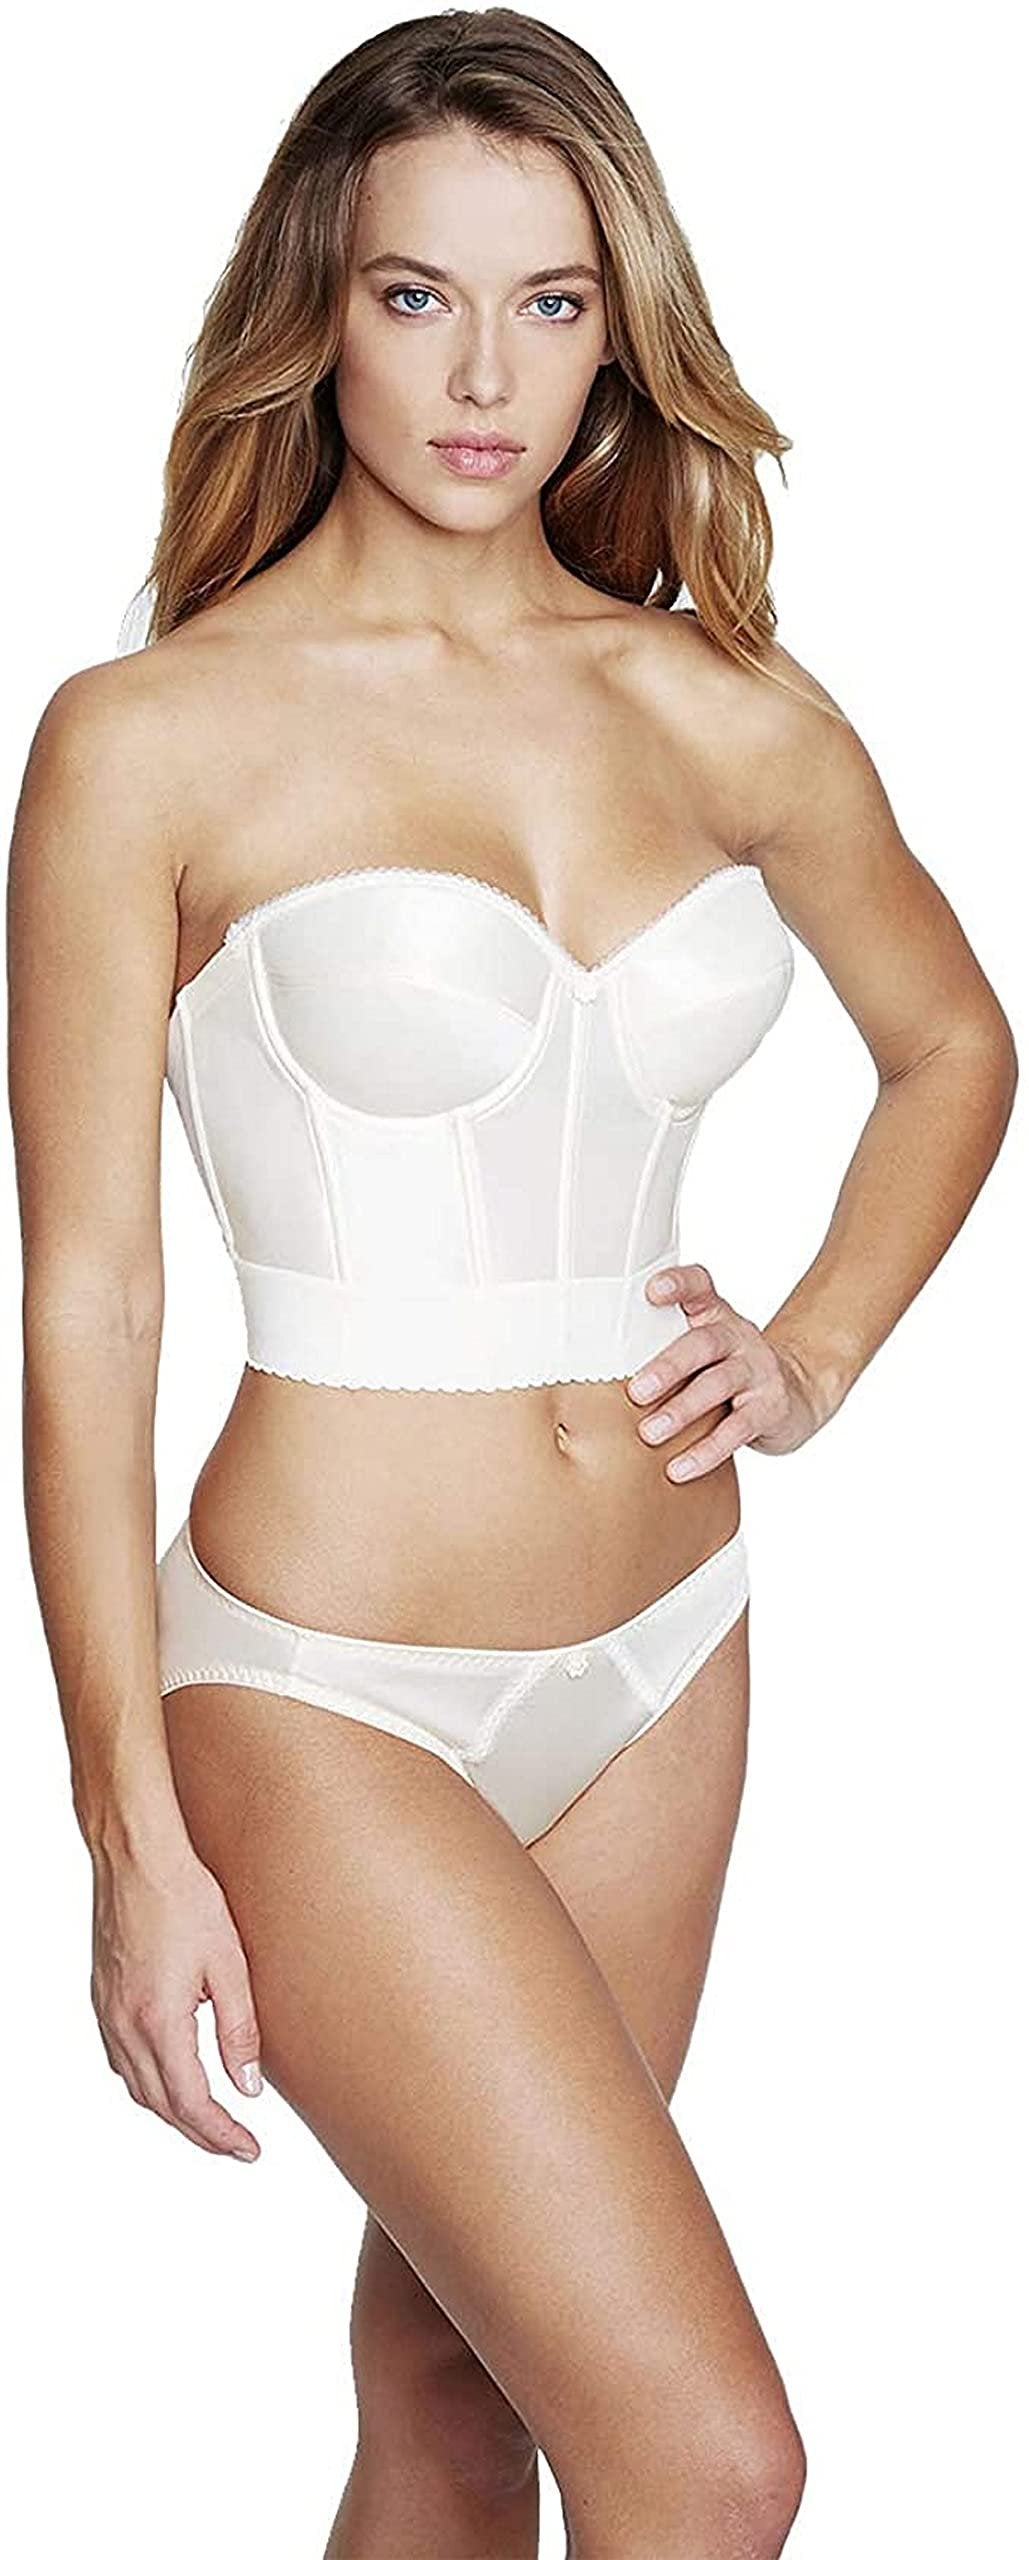 New Dominique Noemi Strapless Backless Bra Ivory 38C - Free Shipping & Returns